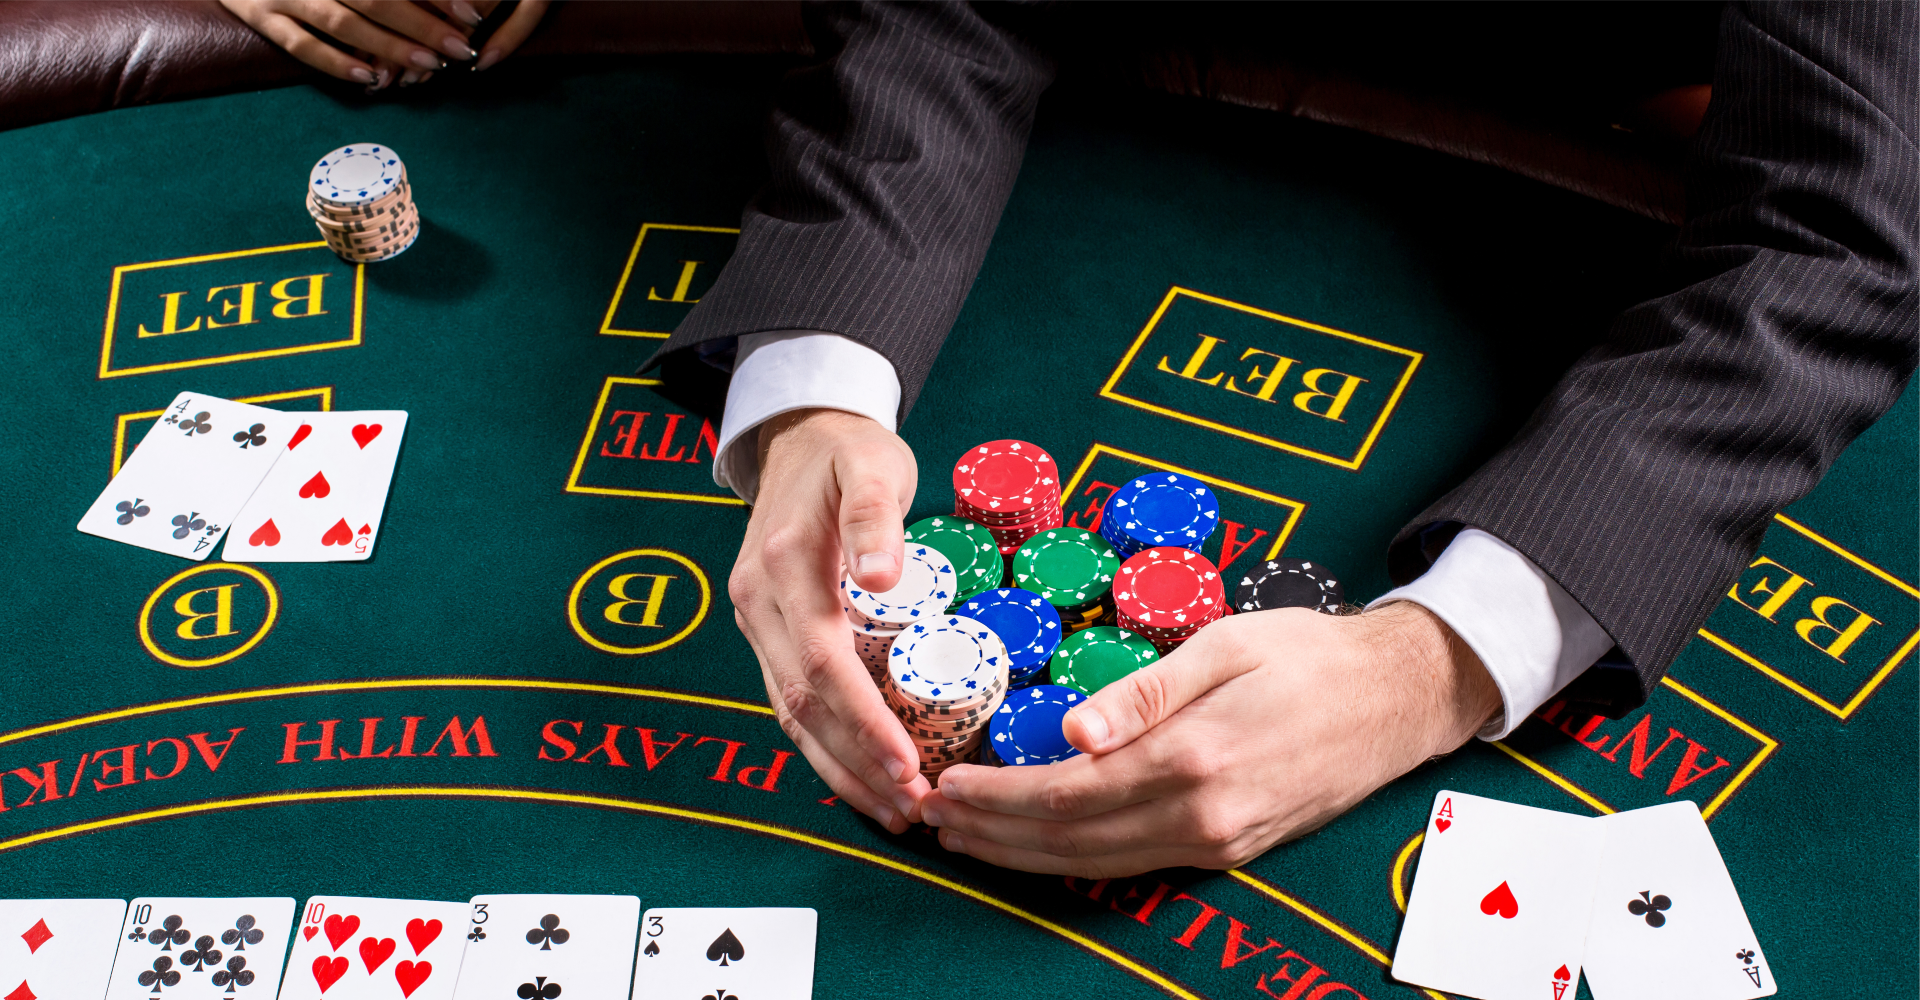 Steps Involved In Playing Poker Games